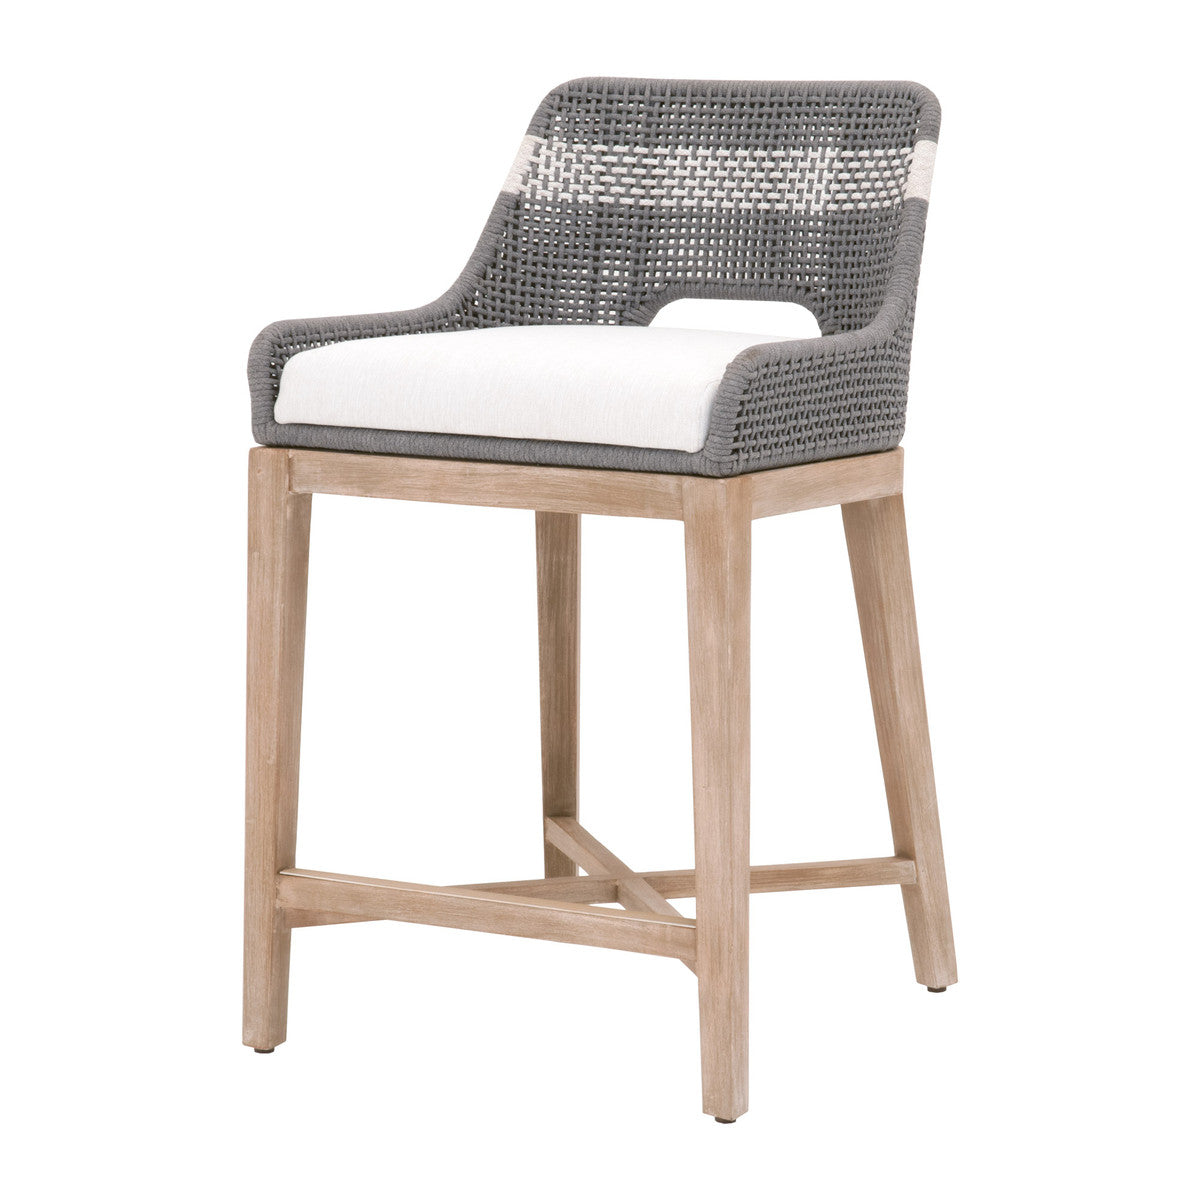 Tapestry Counter Stool in Dove Flat Rope, White Speckle Stripe, White Speckle, Natural Gray Mahogany